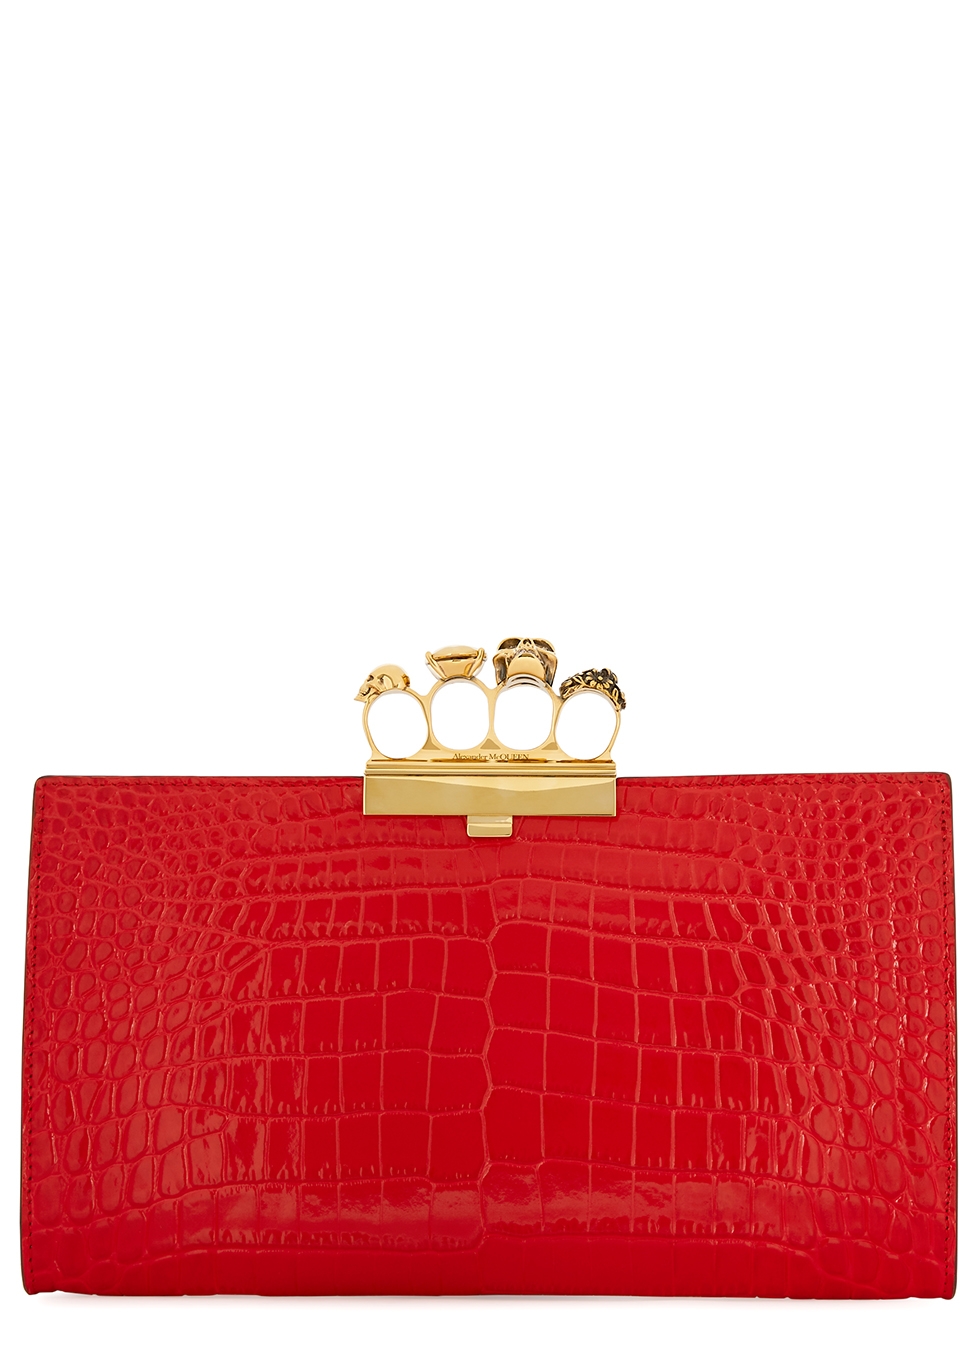 Alexander McQueen Skull Four Ring crocodile-effect leather clutch ...